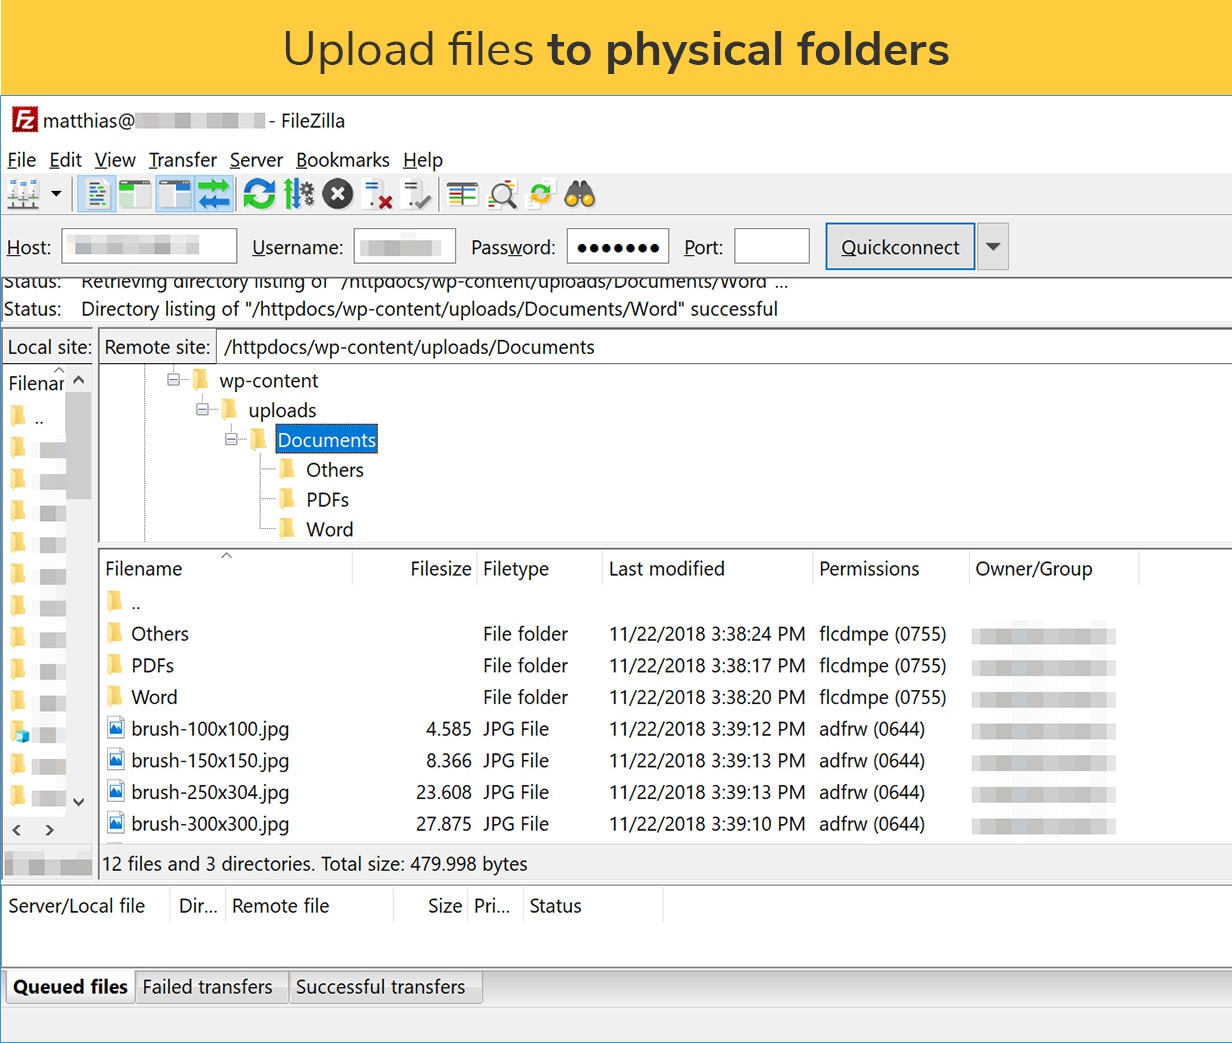 Upload files to physical folders